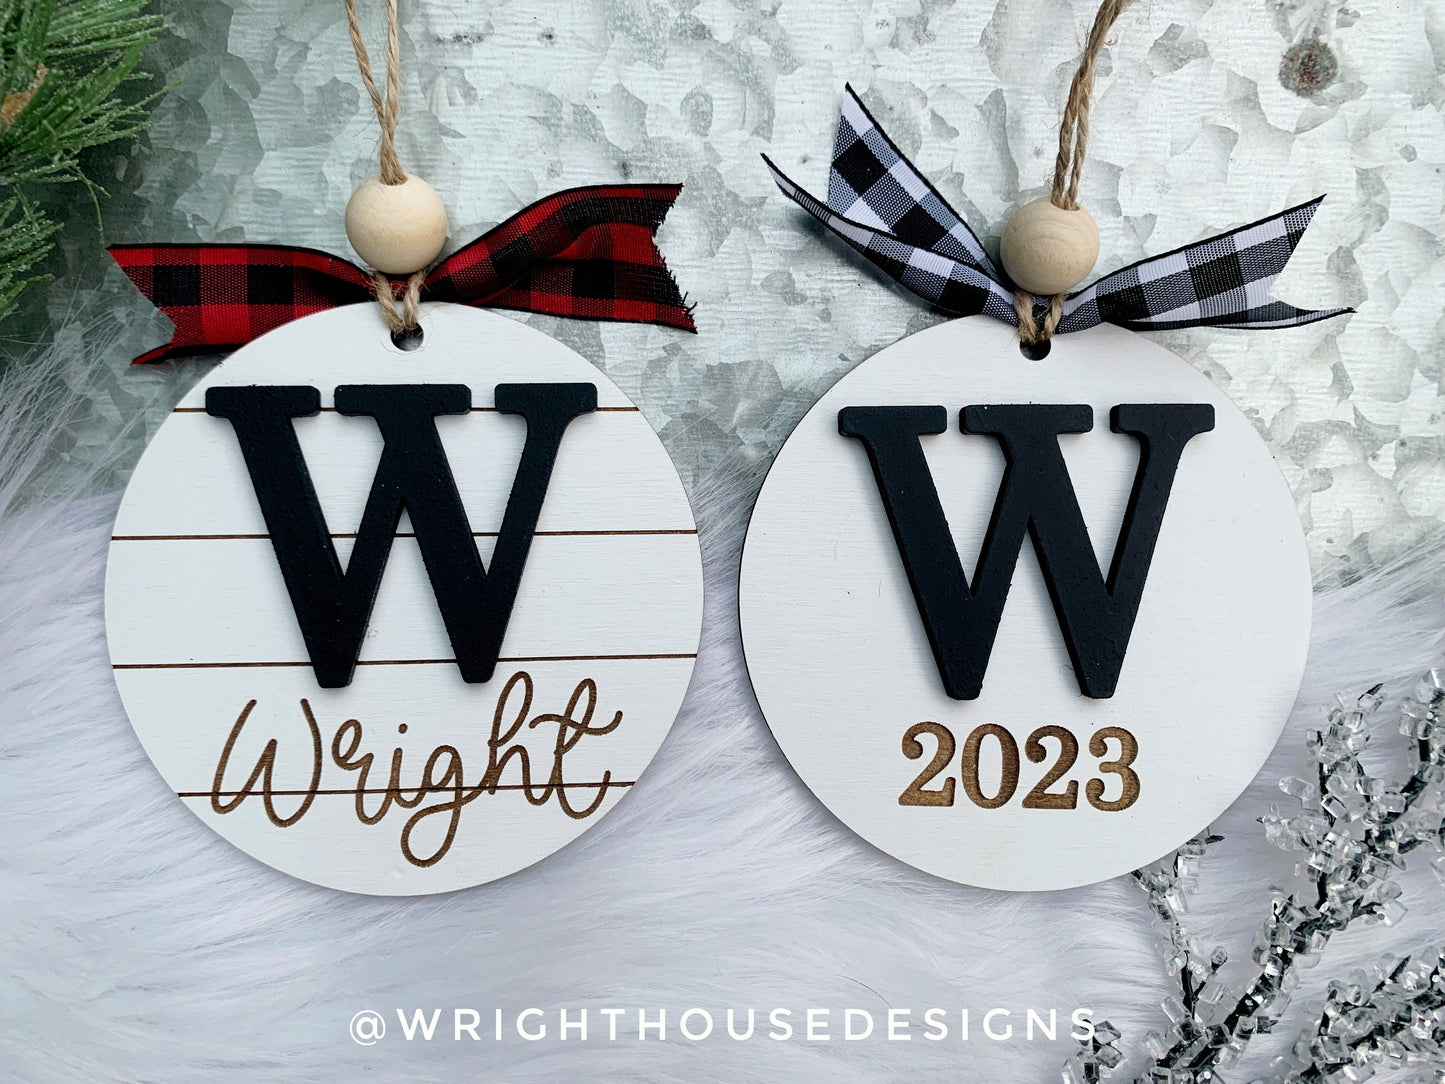 Personalized Initial and Year Christmas Ornaments - Engraved Personalizable Shiplap Ornaments - Cut File For Glowforge - Digital SVG File